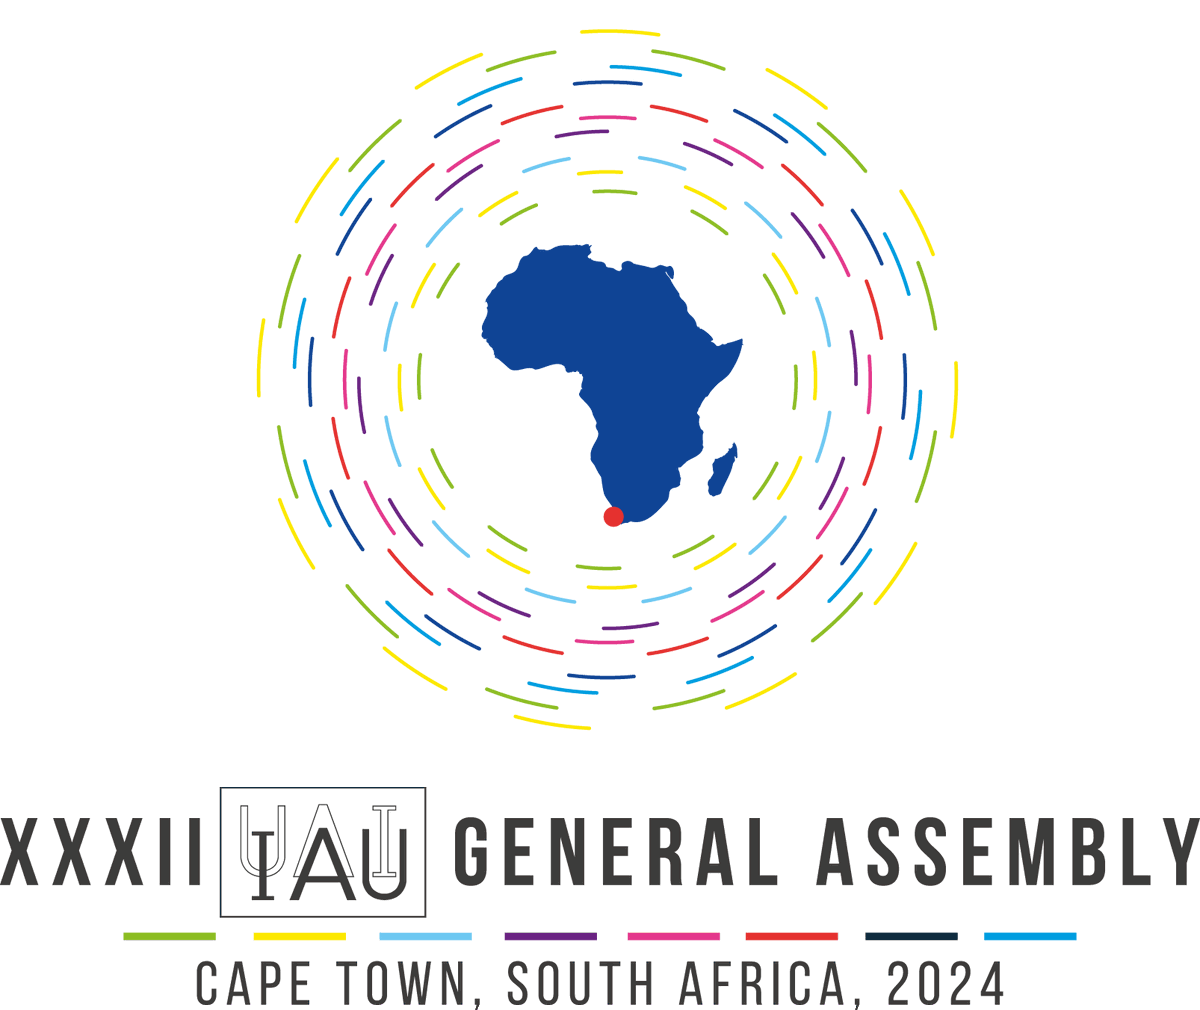 Abstract submissions and grant applications are now open for the 32nd International Astronomical Union (IAU) General Assembly (GA) and may be submitted from 30 November 2023 to 1 March 2024. 🇿🇦aas.org/posts/news/202…